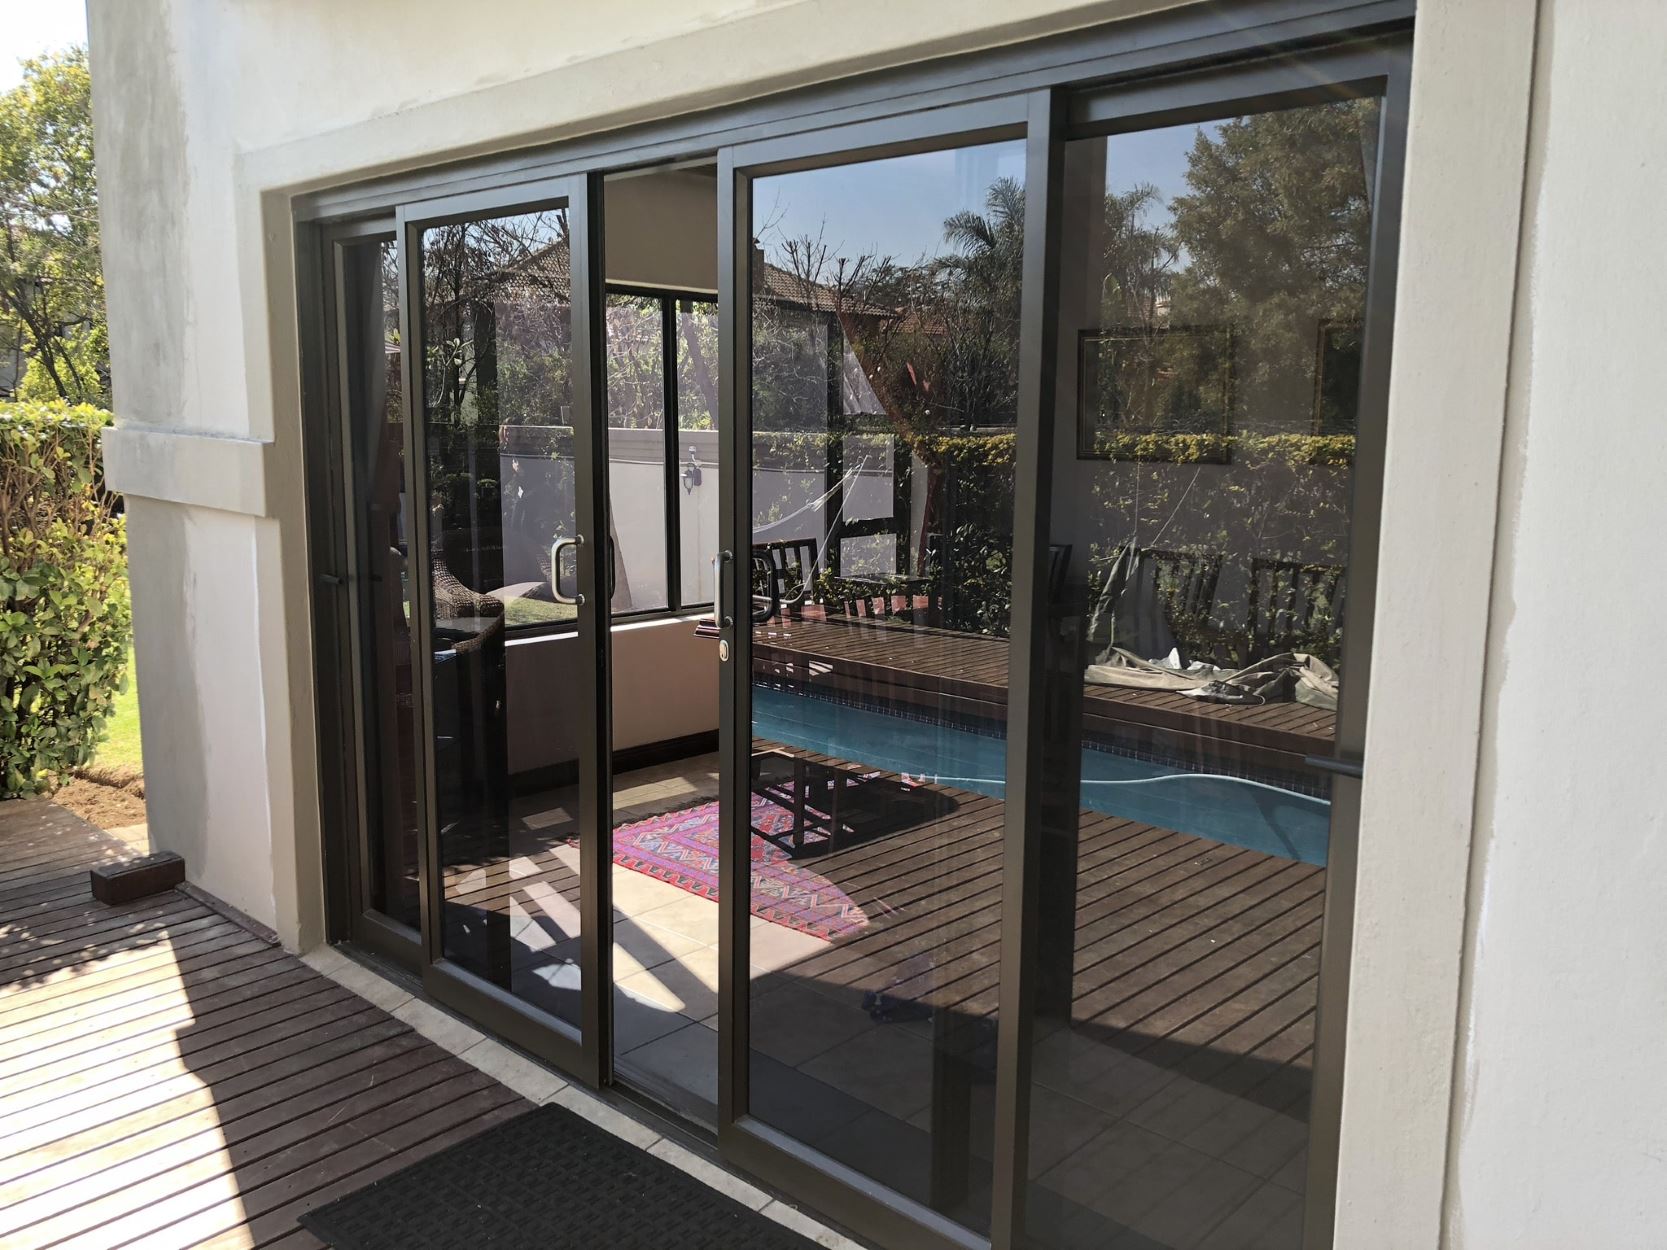 Which Type Of Glass Is Used In Most Sliding Doors